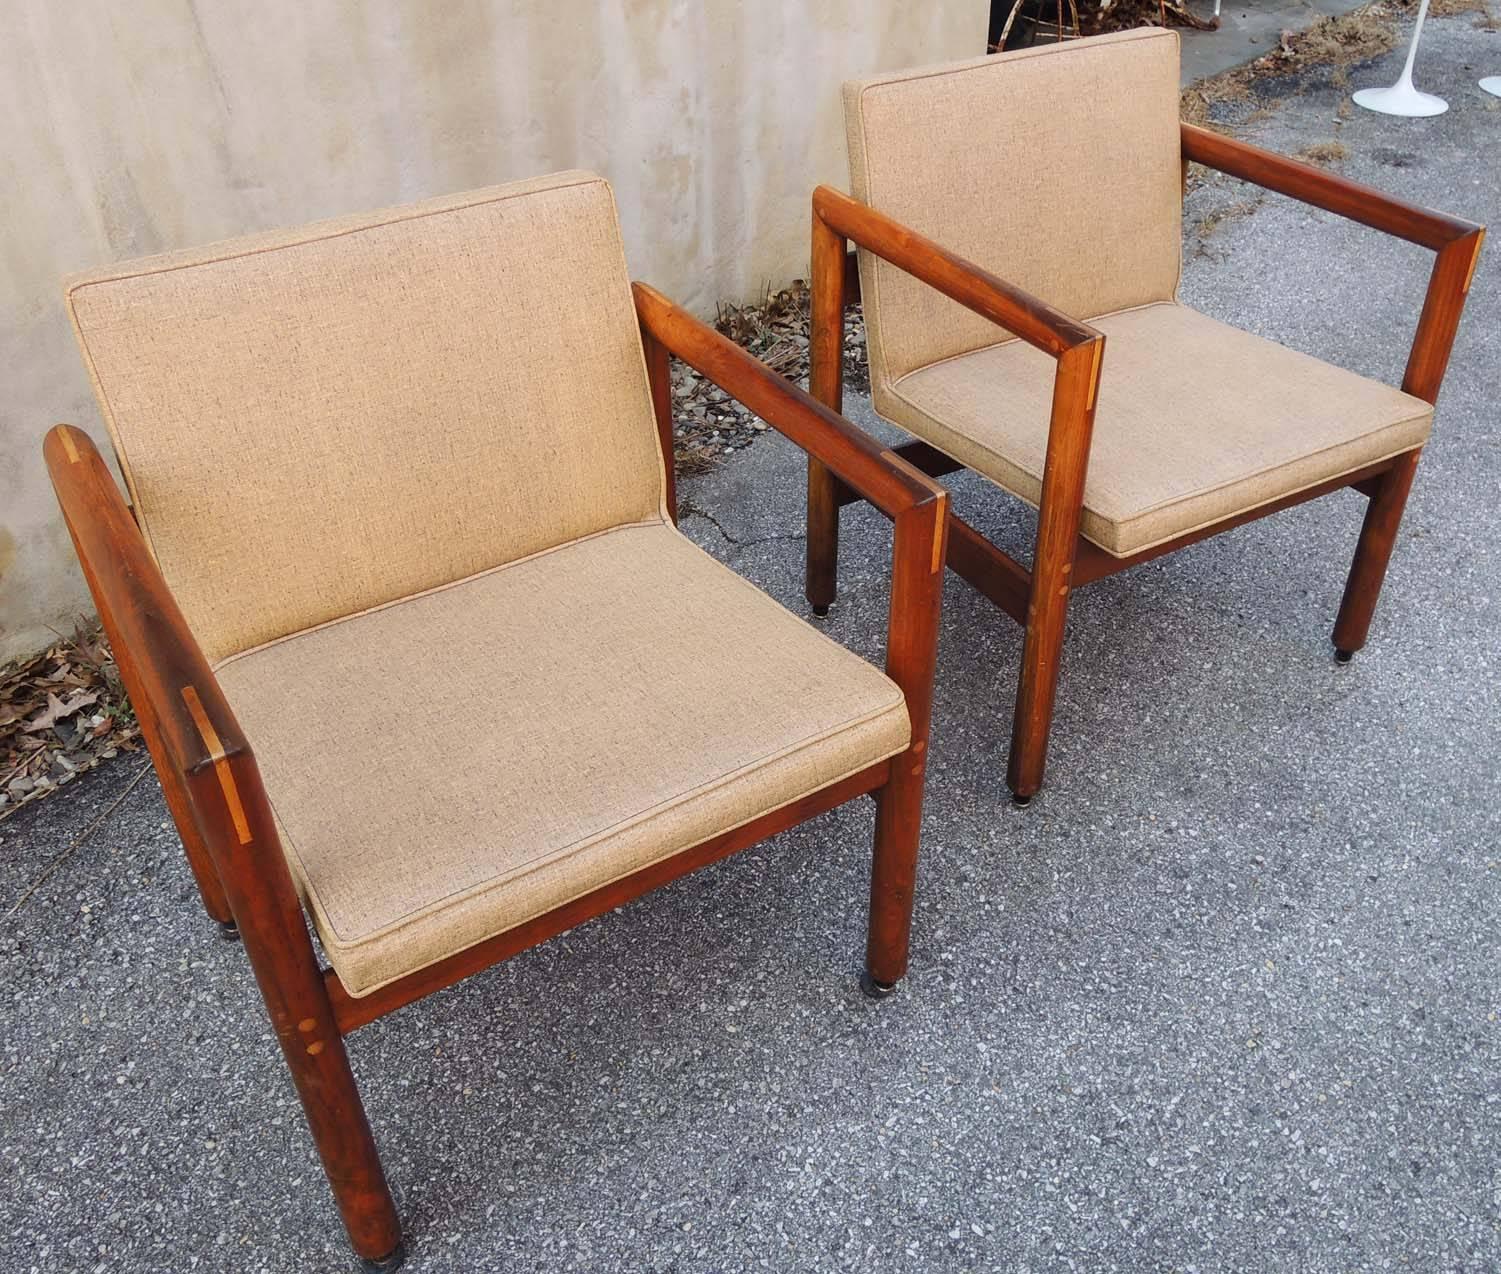 Unusual set of four armchairs, with original Thonet labels. Compact rectilinear design. Interesting details of contrasting wood details in arms and as screw covers. Original seat covers.